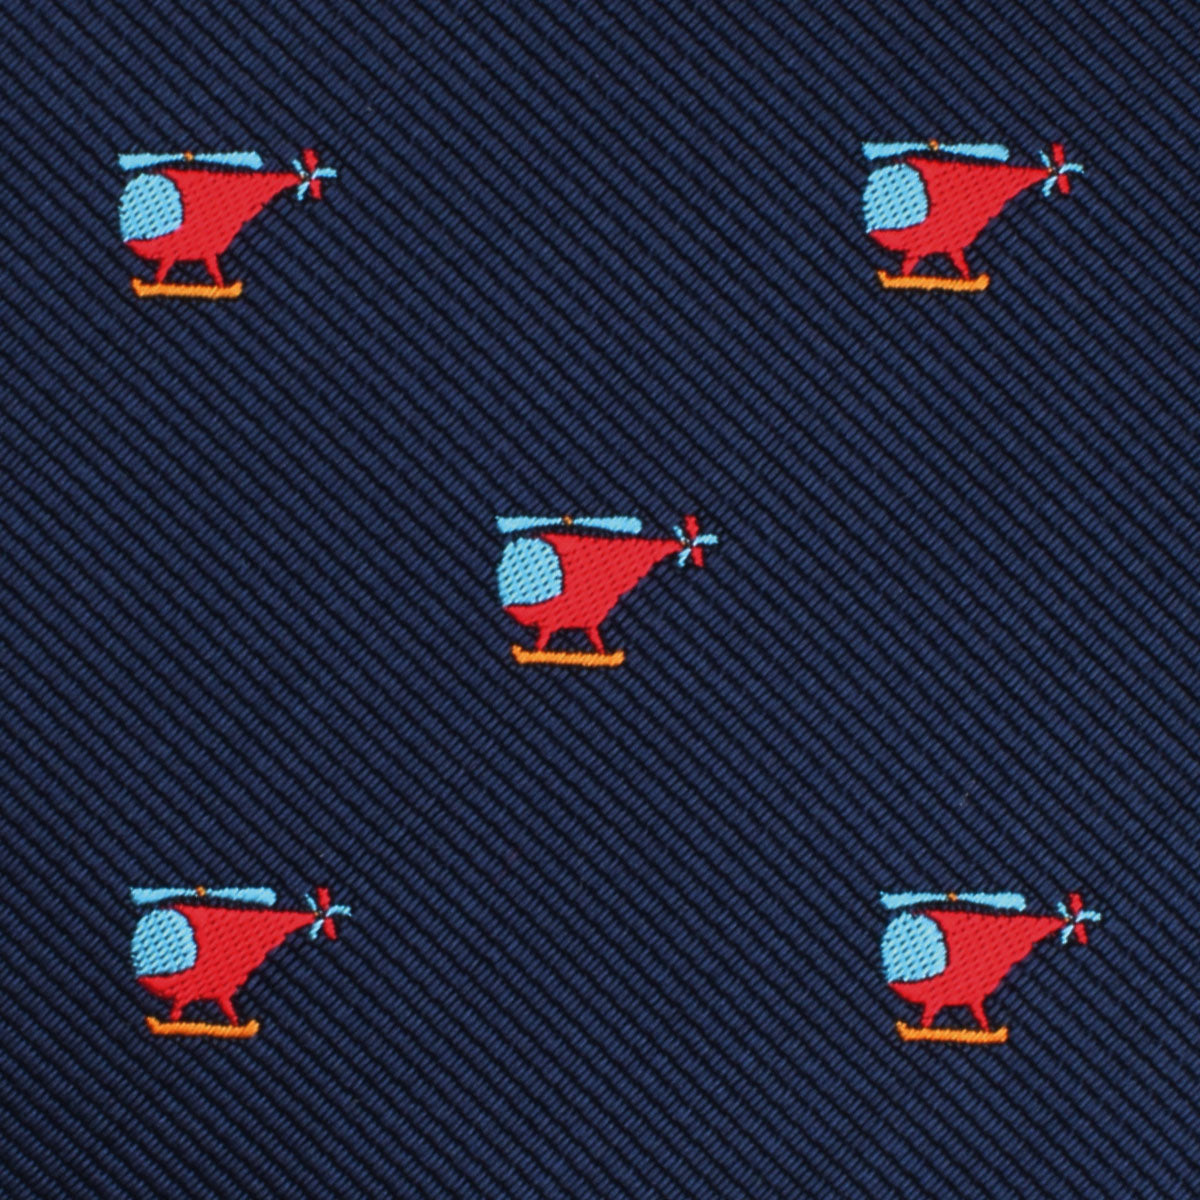 Eurocopter Bow Tie Fabric